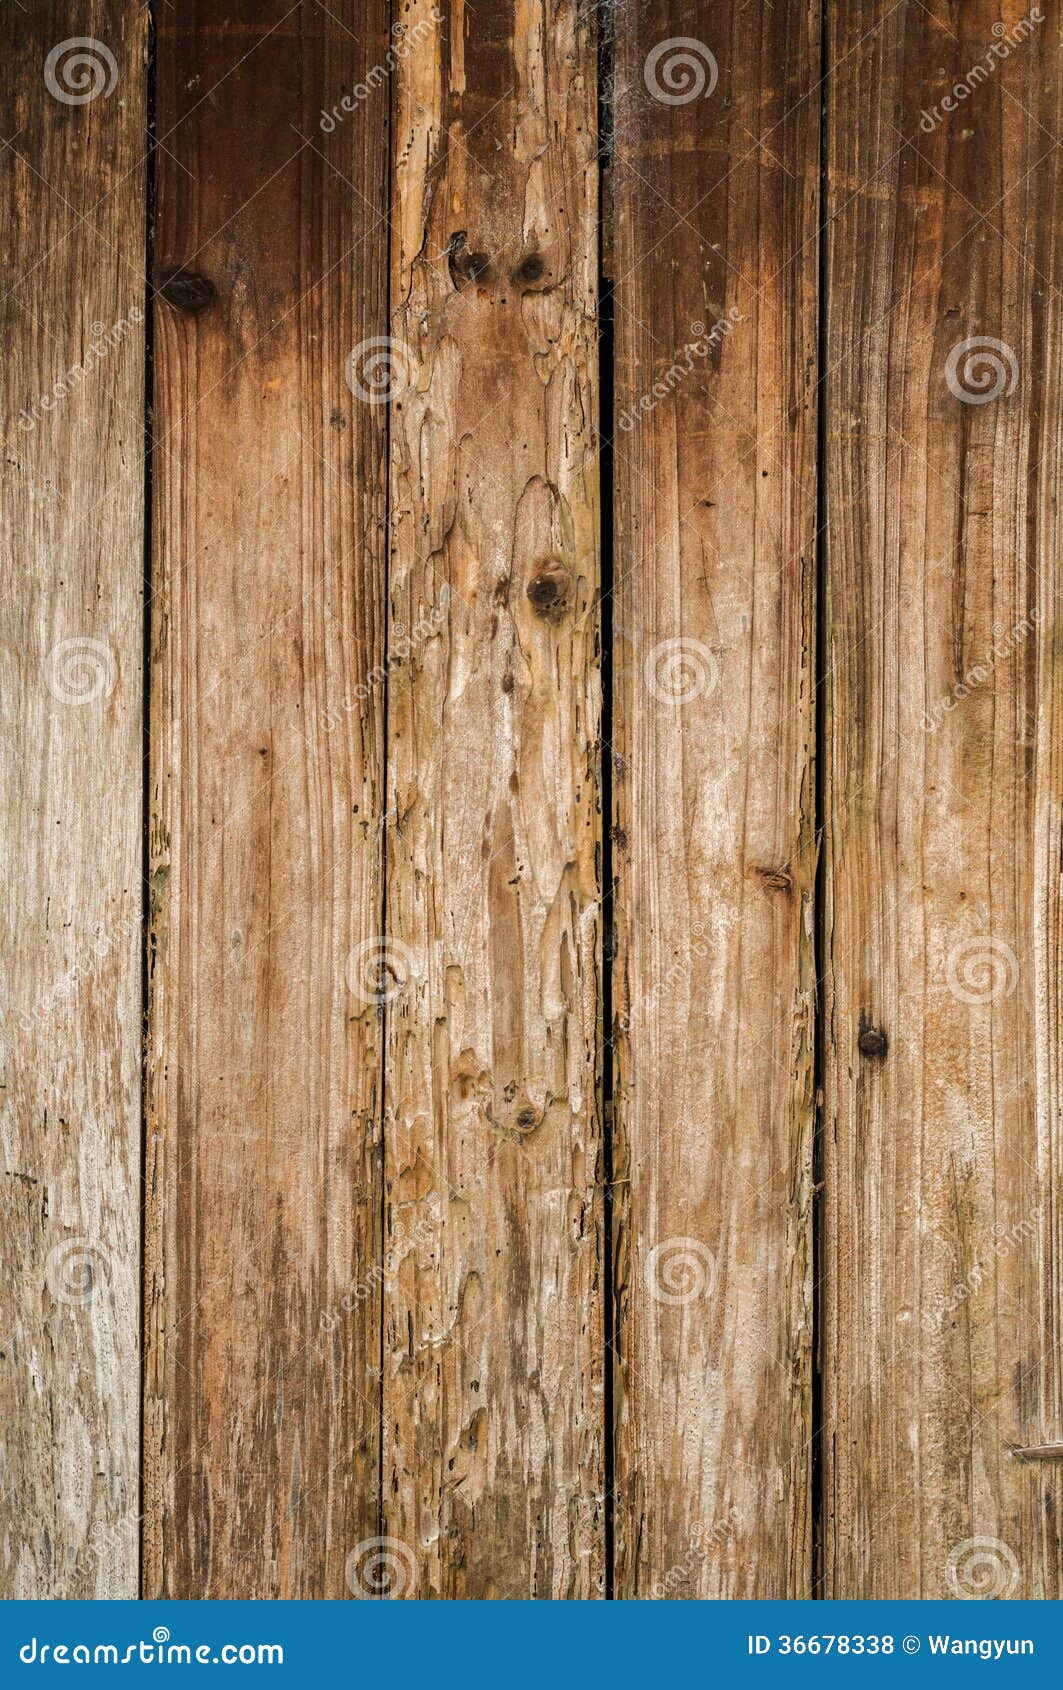 distressed old wood plank boards background